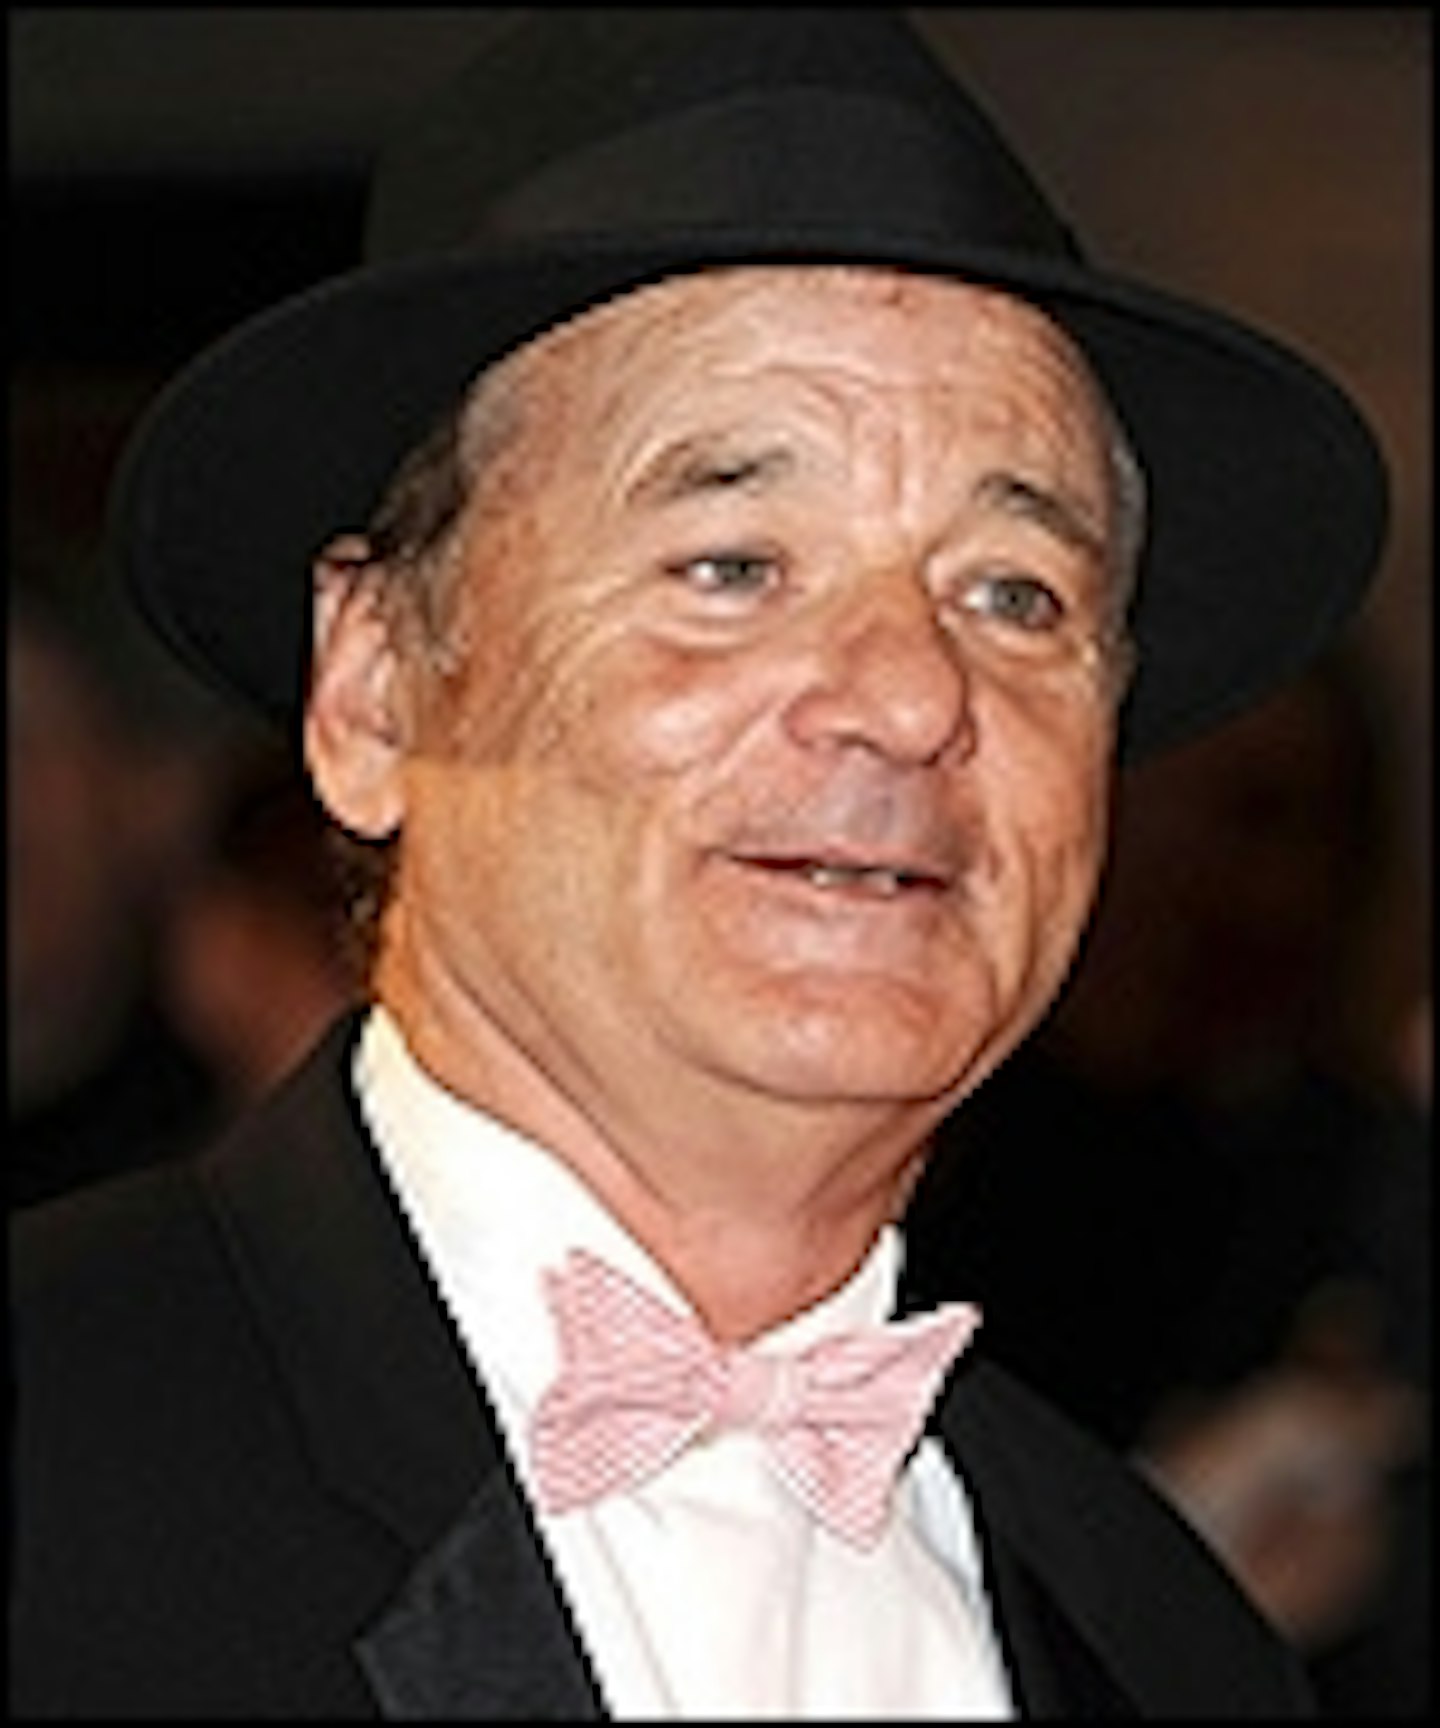 No Bill Murray For Ghostbusters 3?